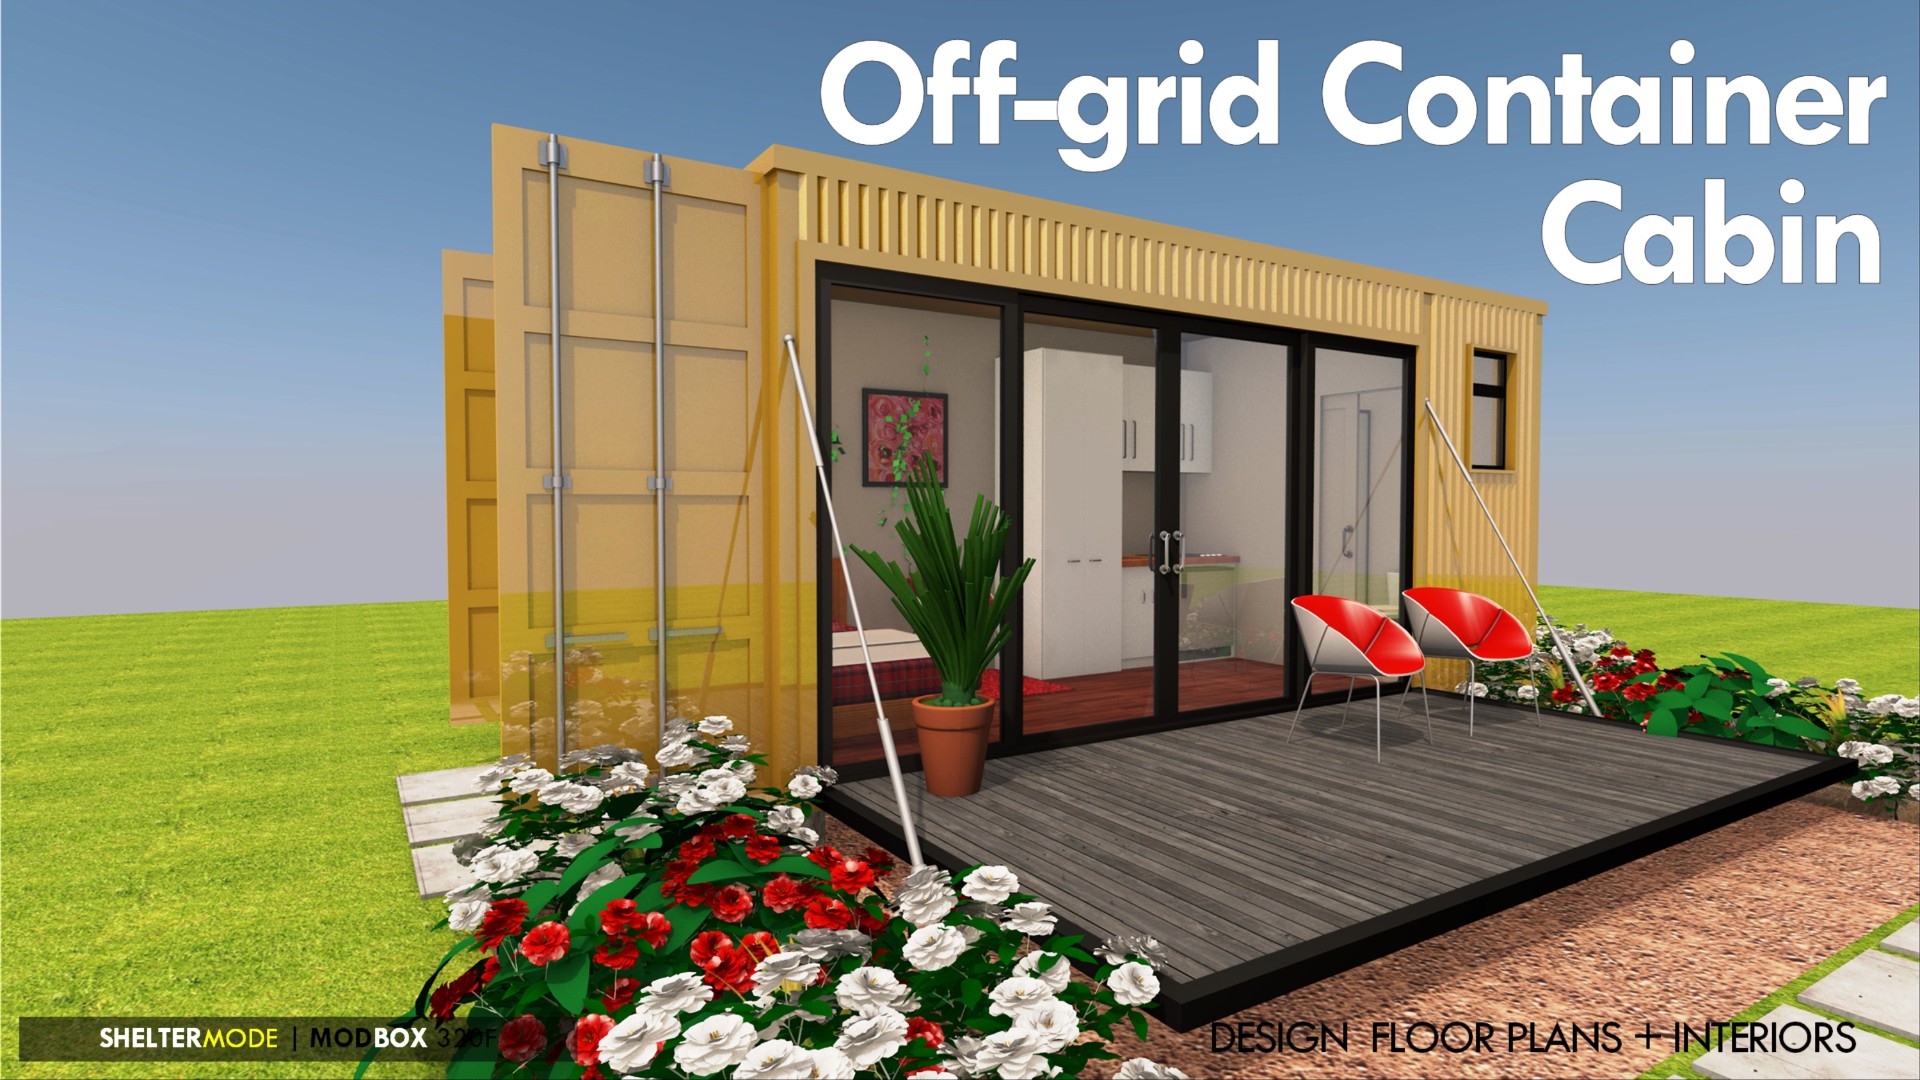 Off-grid Shipping Container Cabin